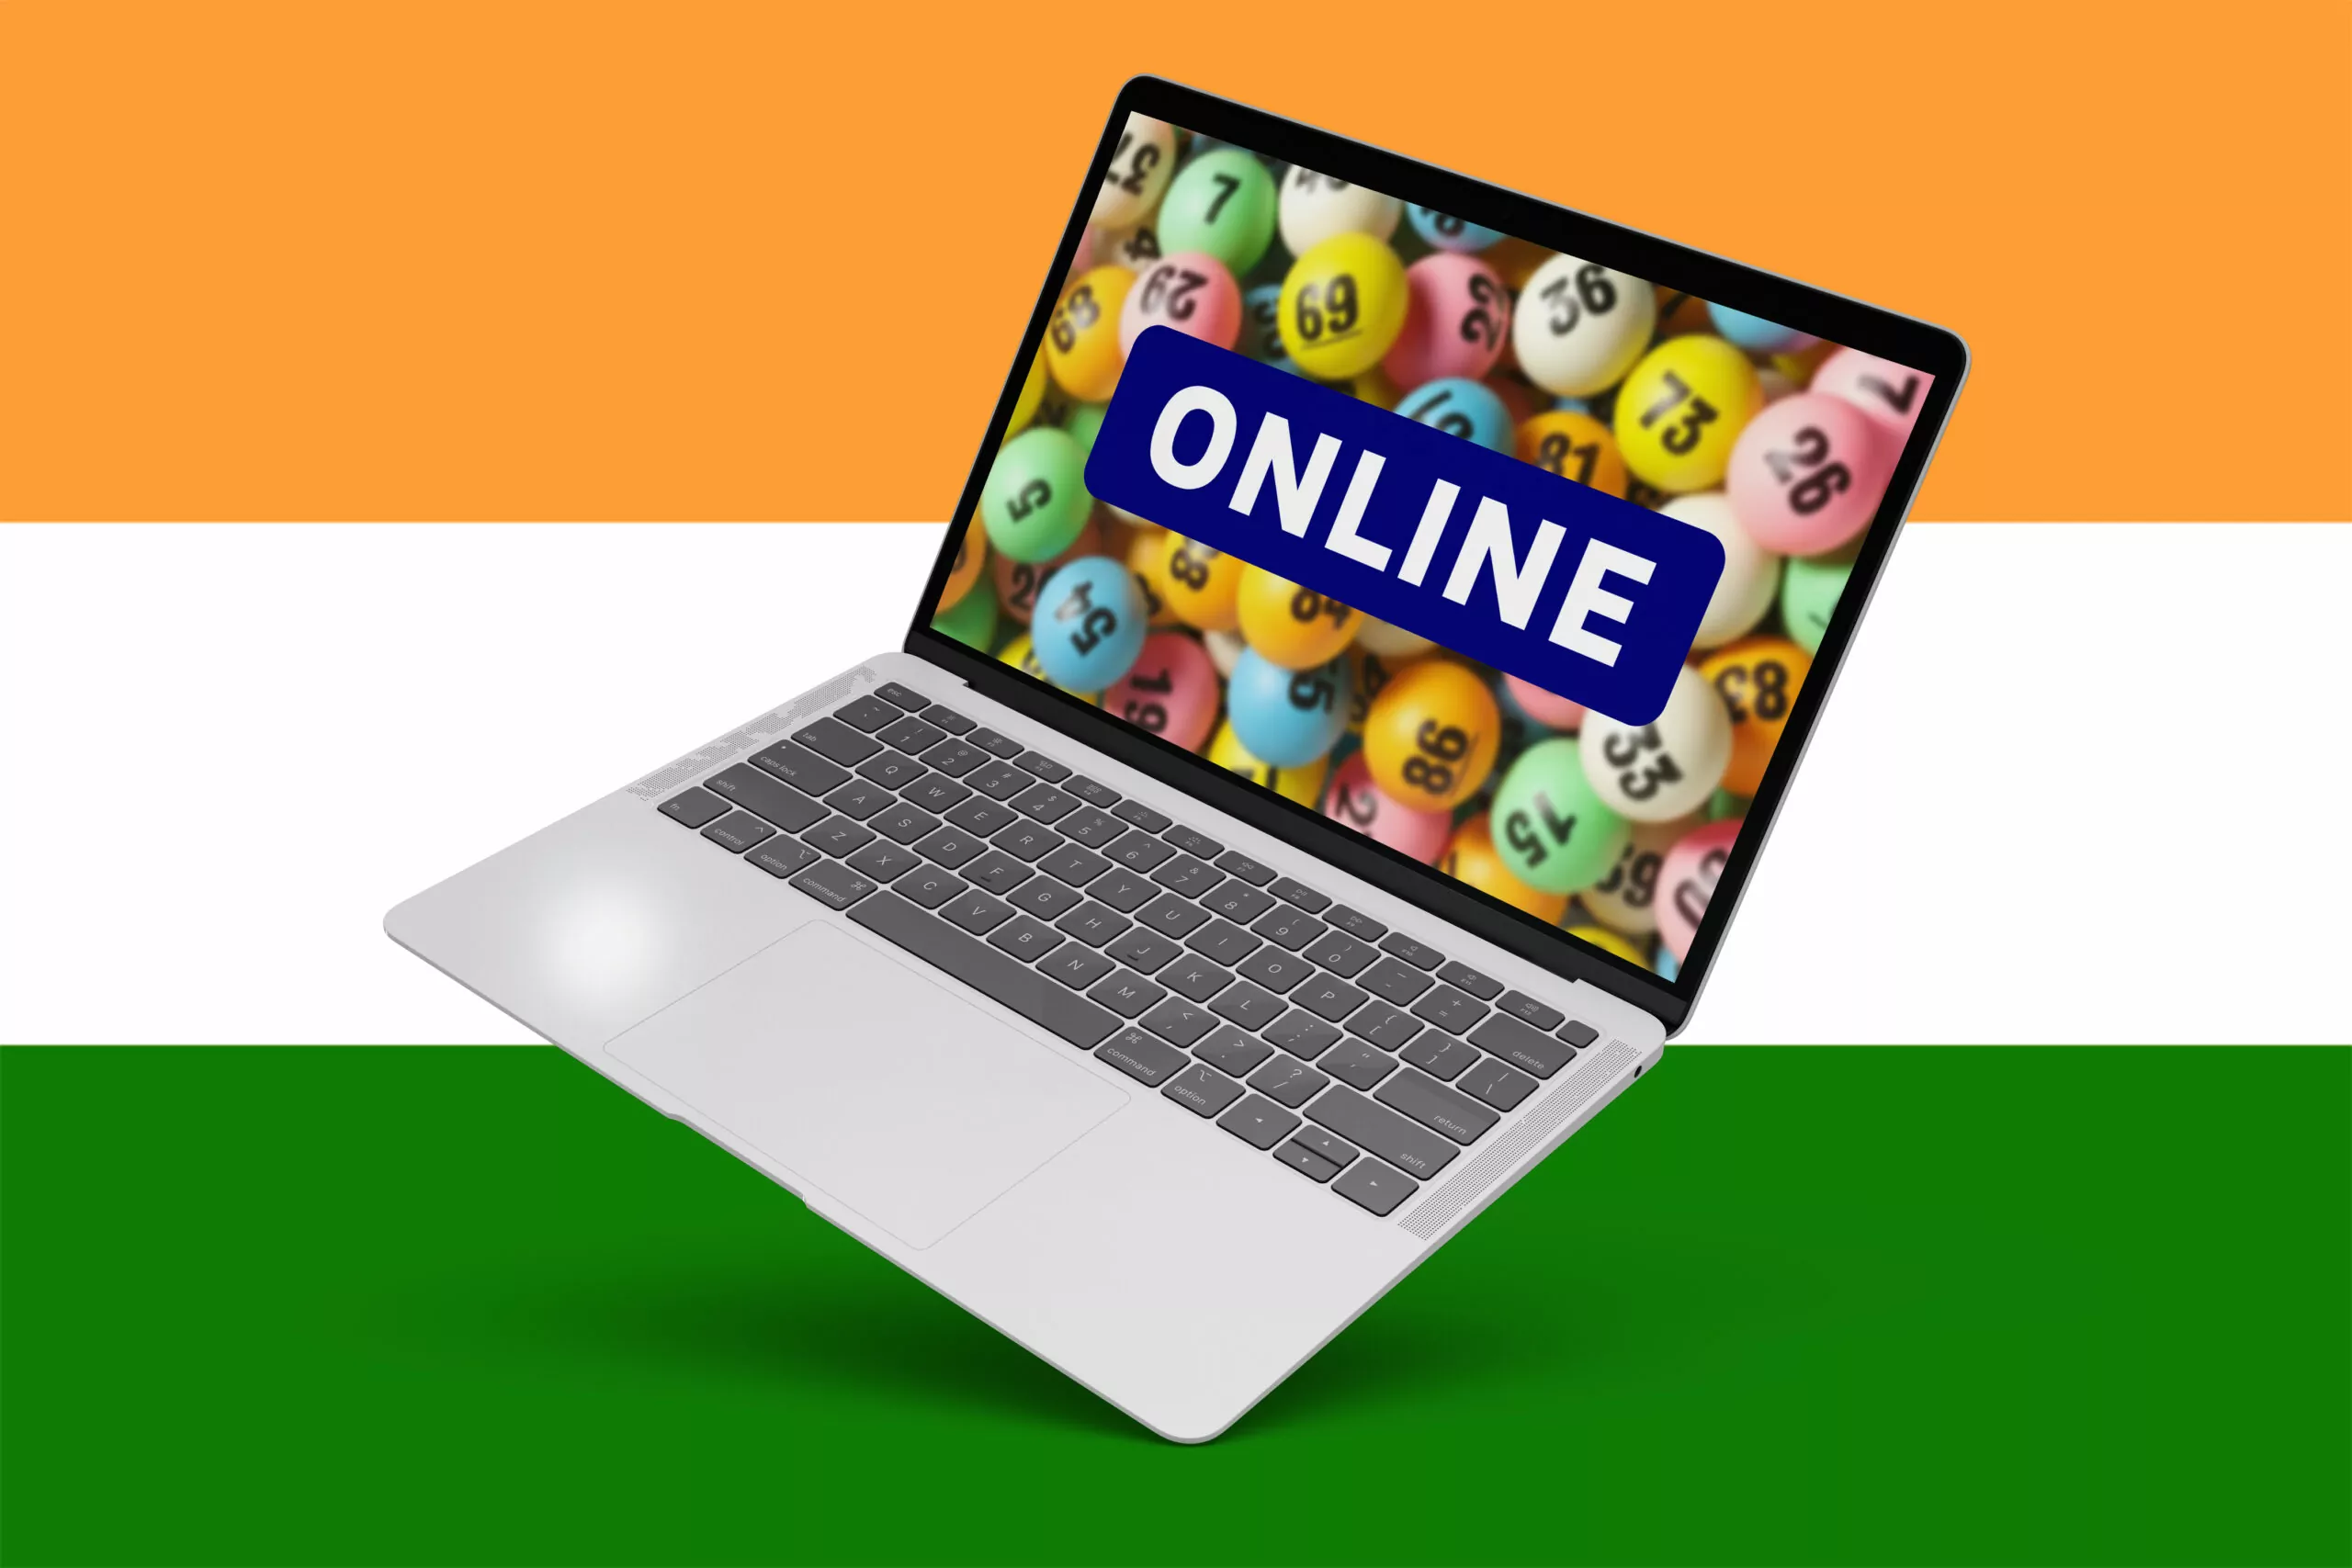 Actual rules of legal online lotteries in India.